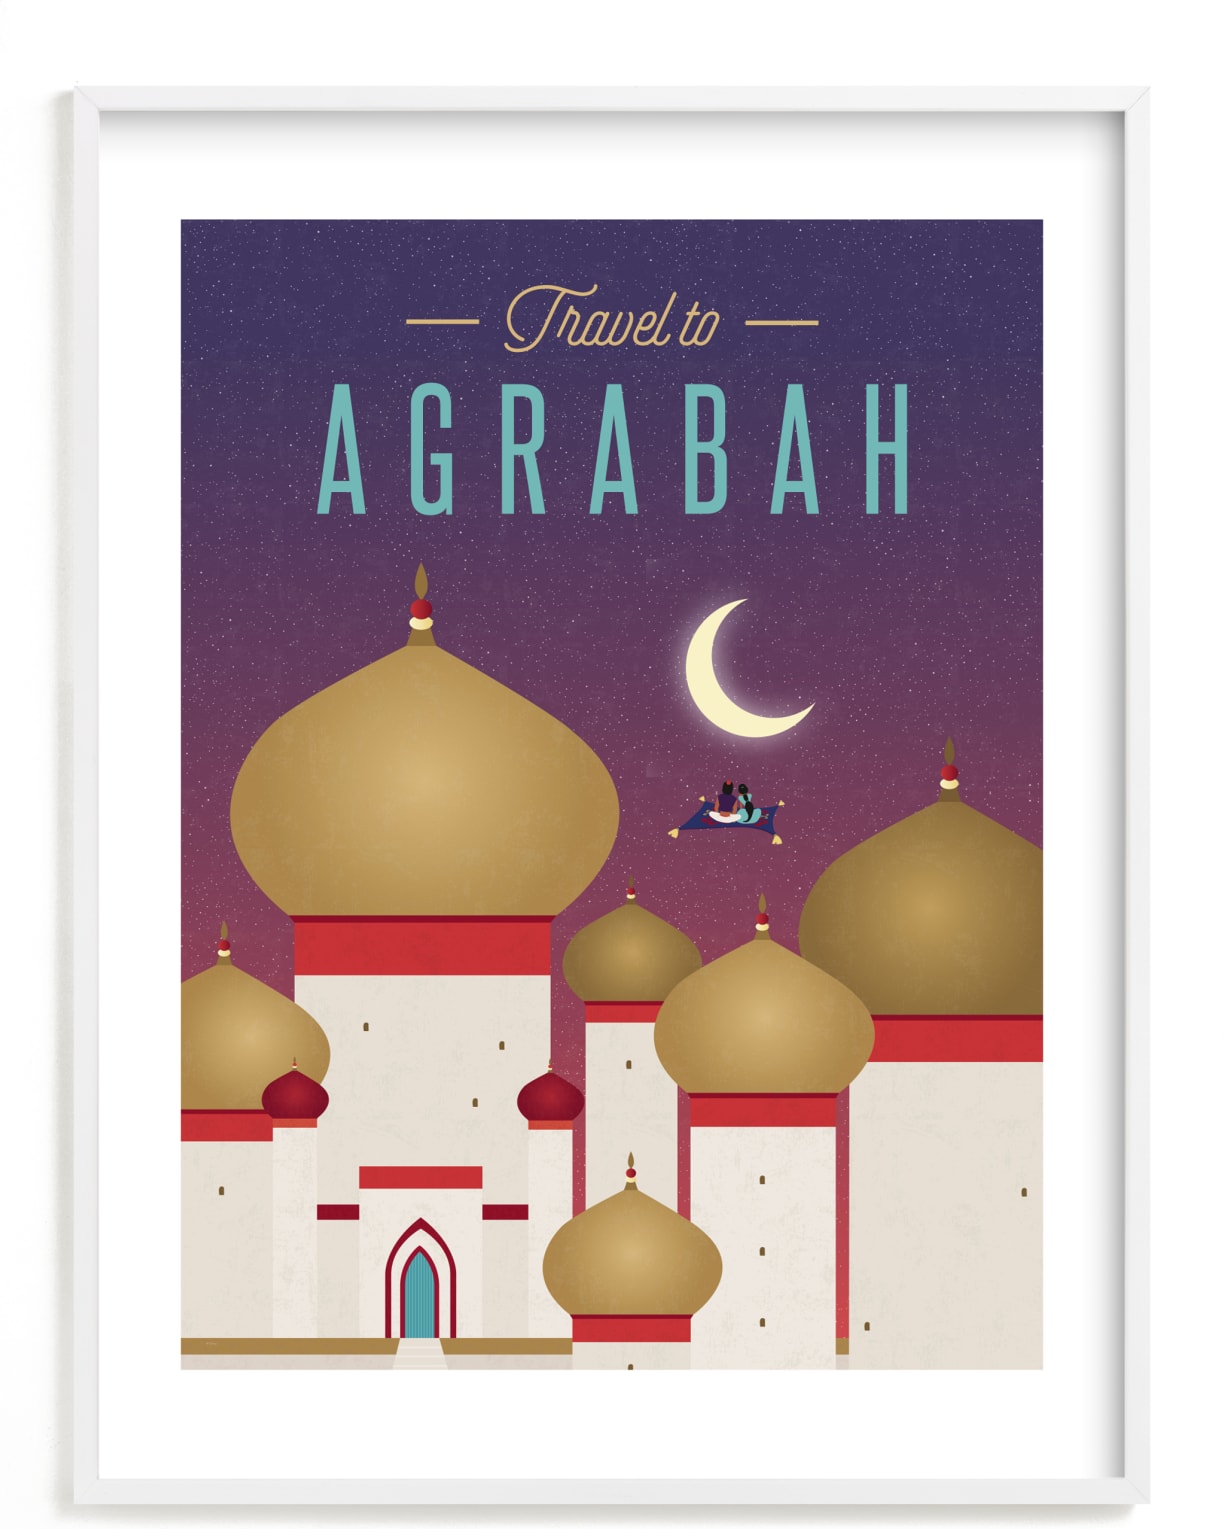 This is a colorful disney art by Erica Krystek called Travel to Agrabah from Disney's Aladdin.